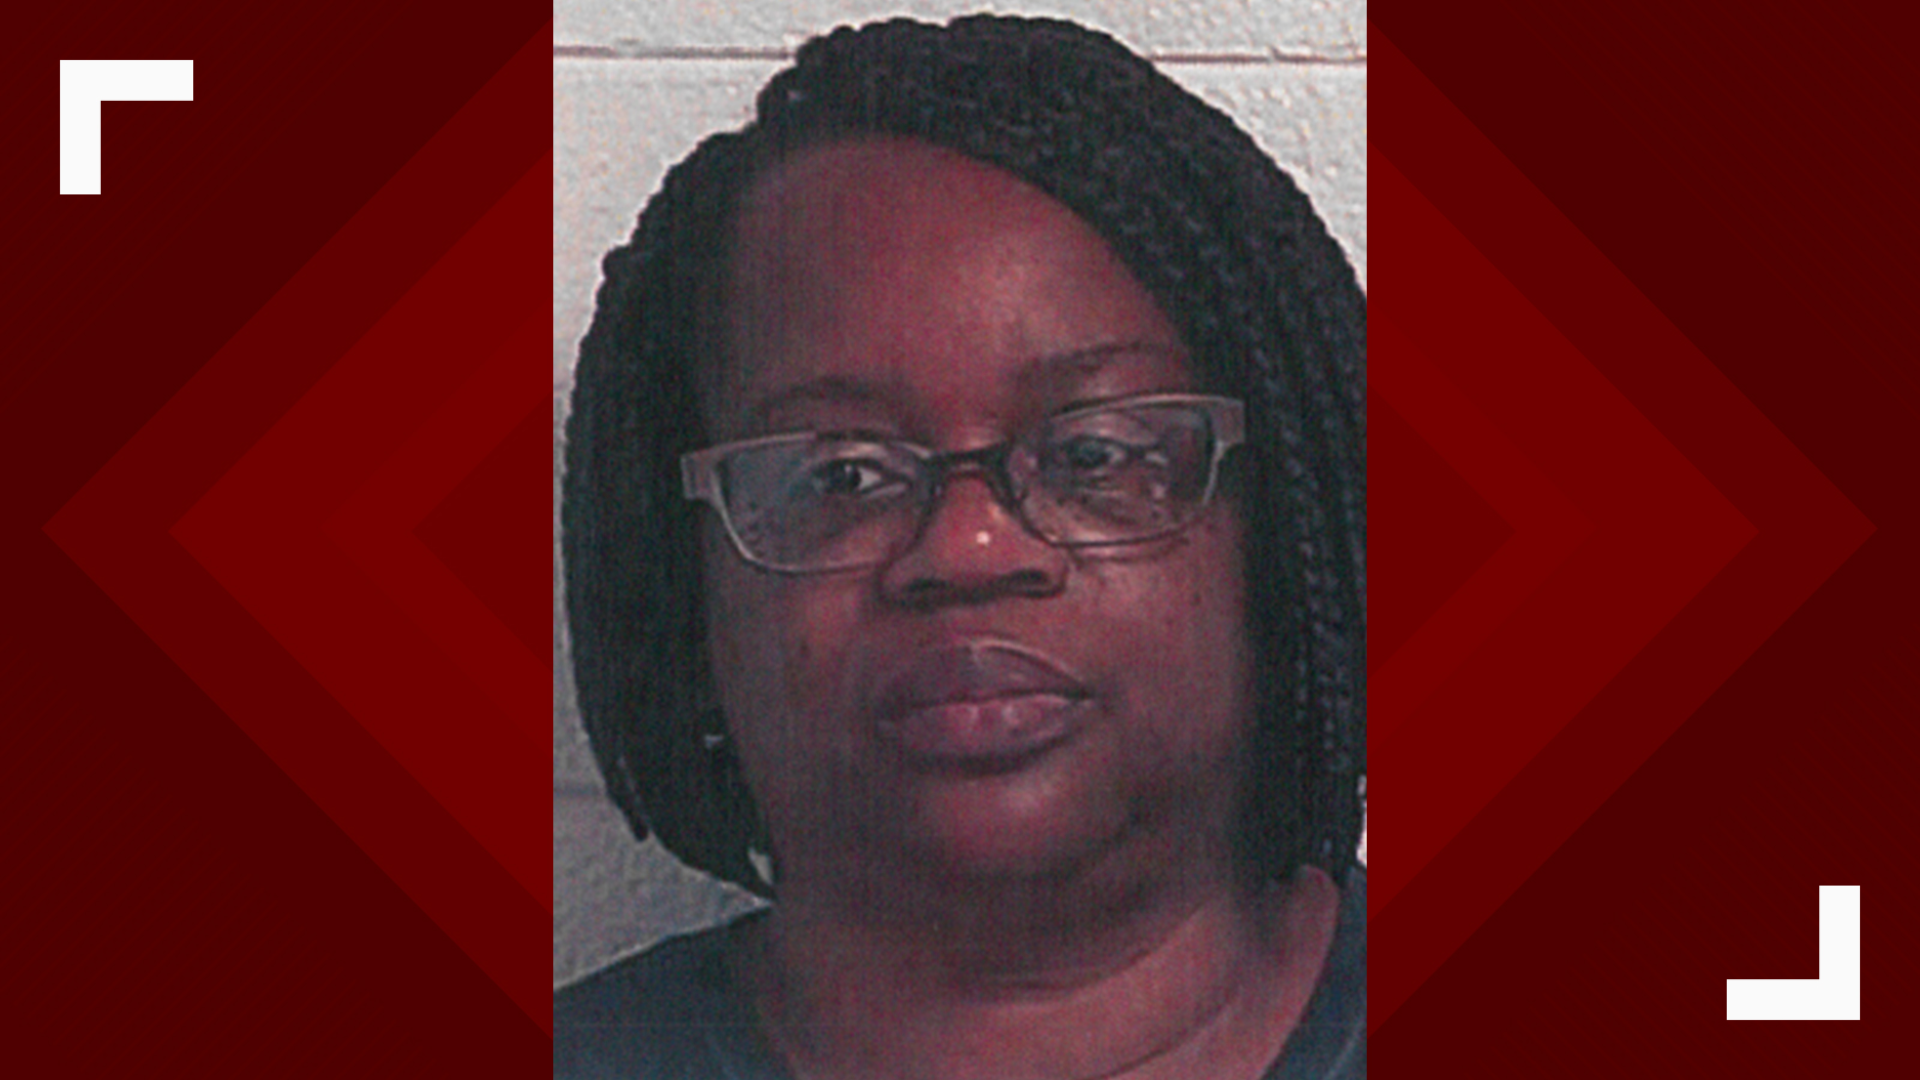 Brenda Copeland is charged with making more than $500,000 in false Medicaid claims. She was arrested Monday and is being held in the Houston County Jail on $30,000 bond.